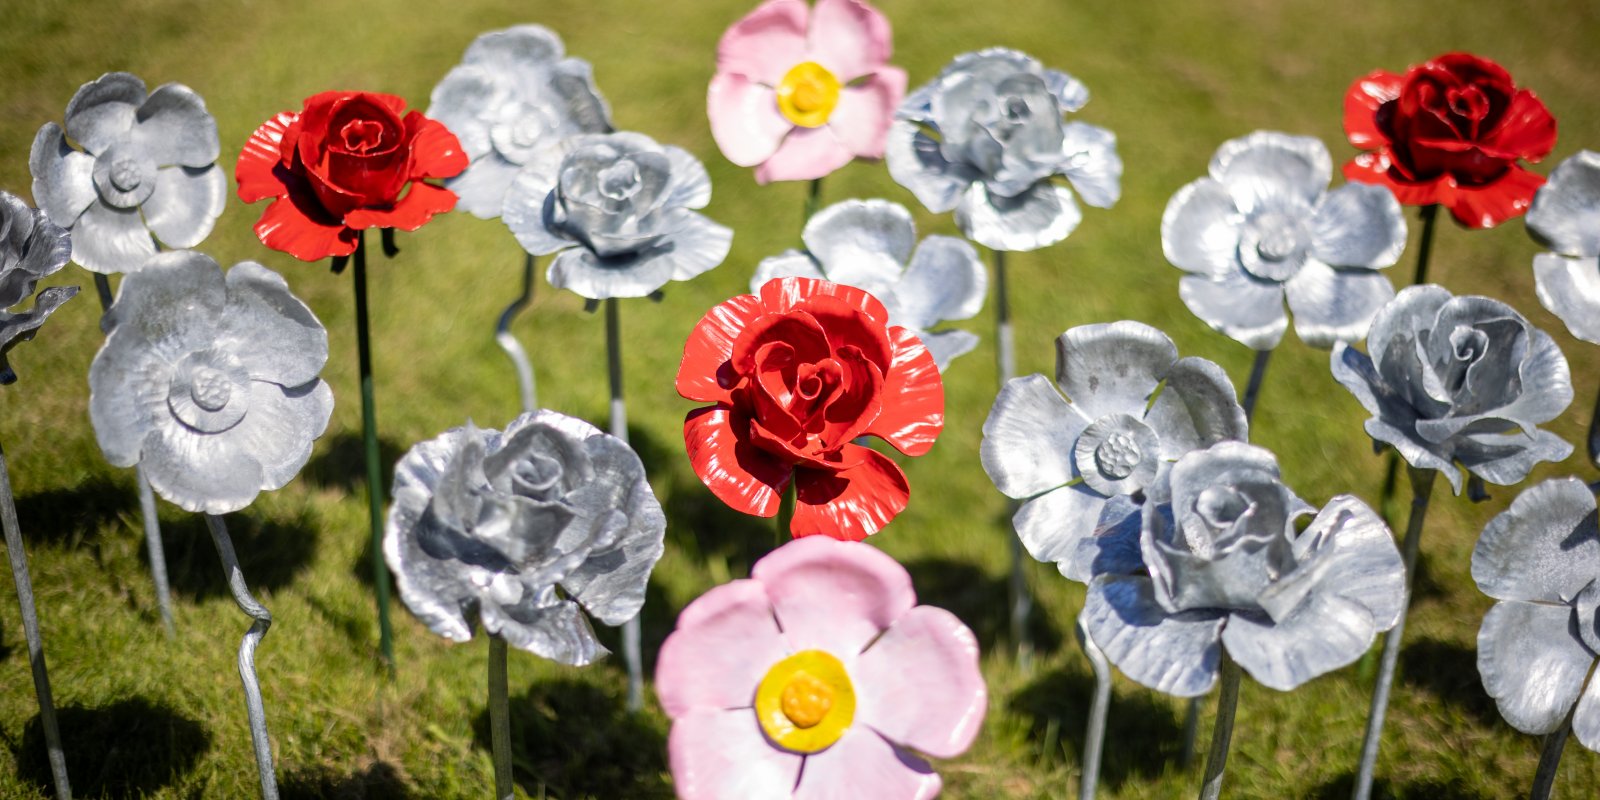 A range of beautiful handcrafted metal roses,both painted and unpainted